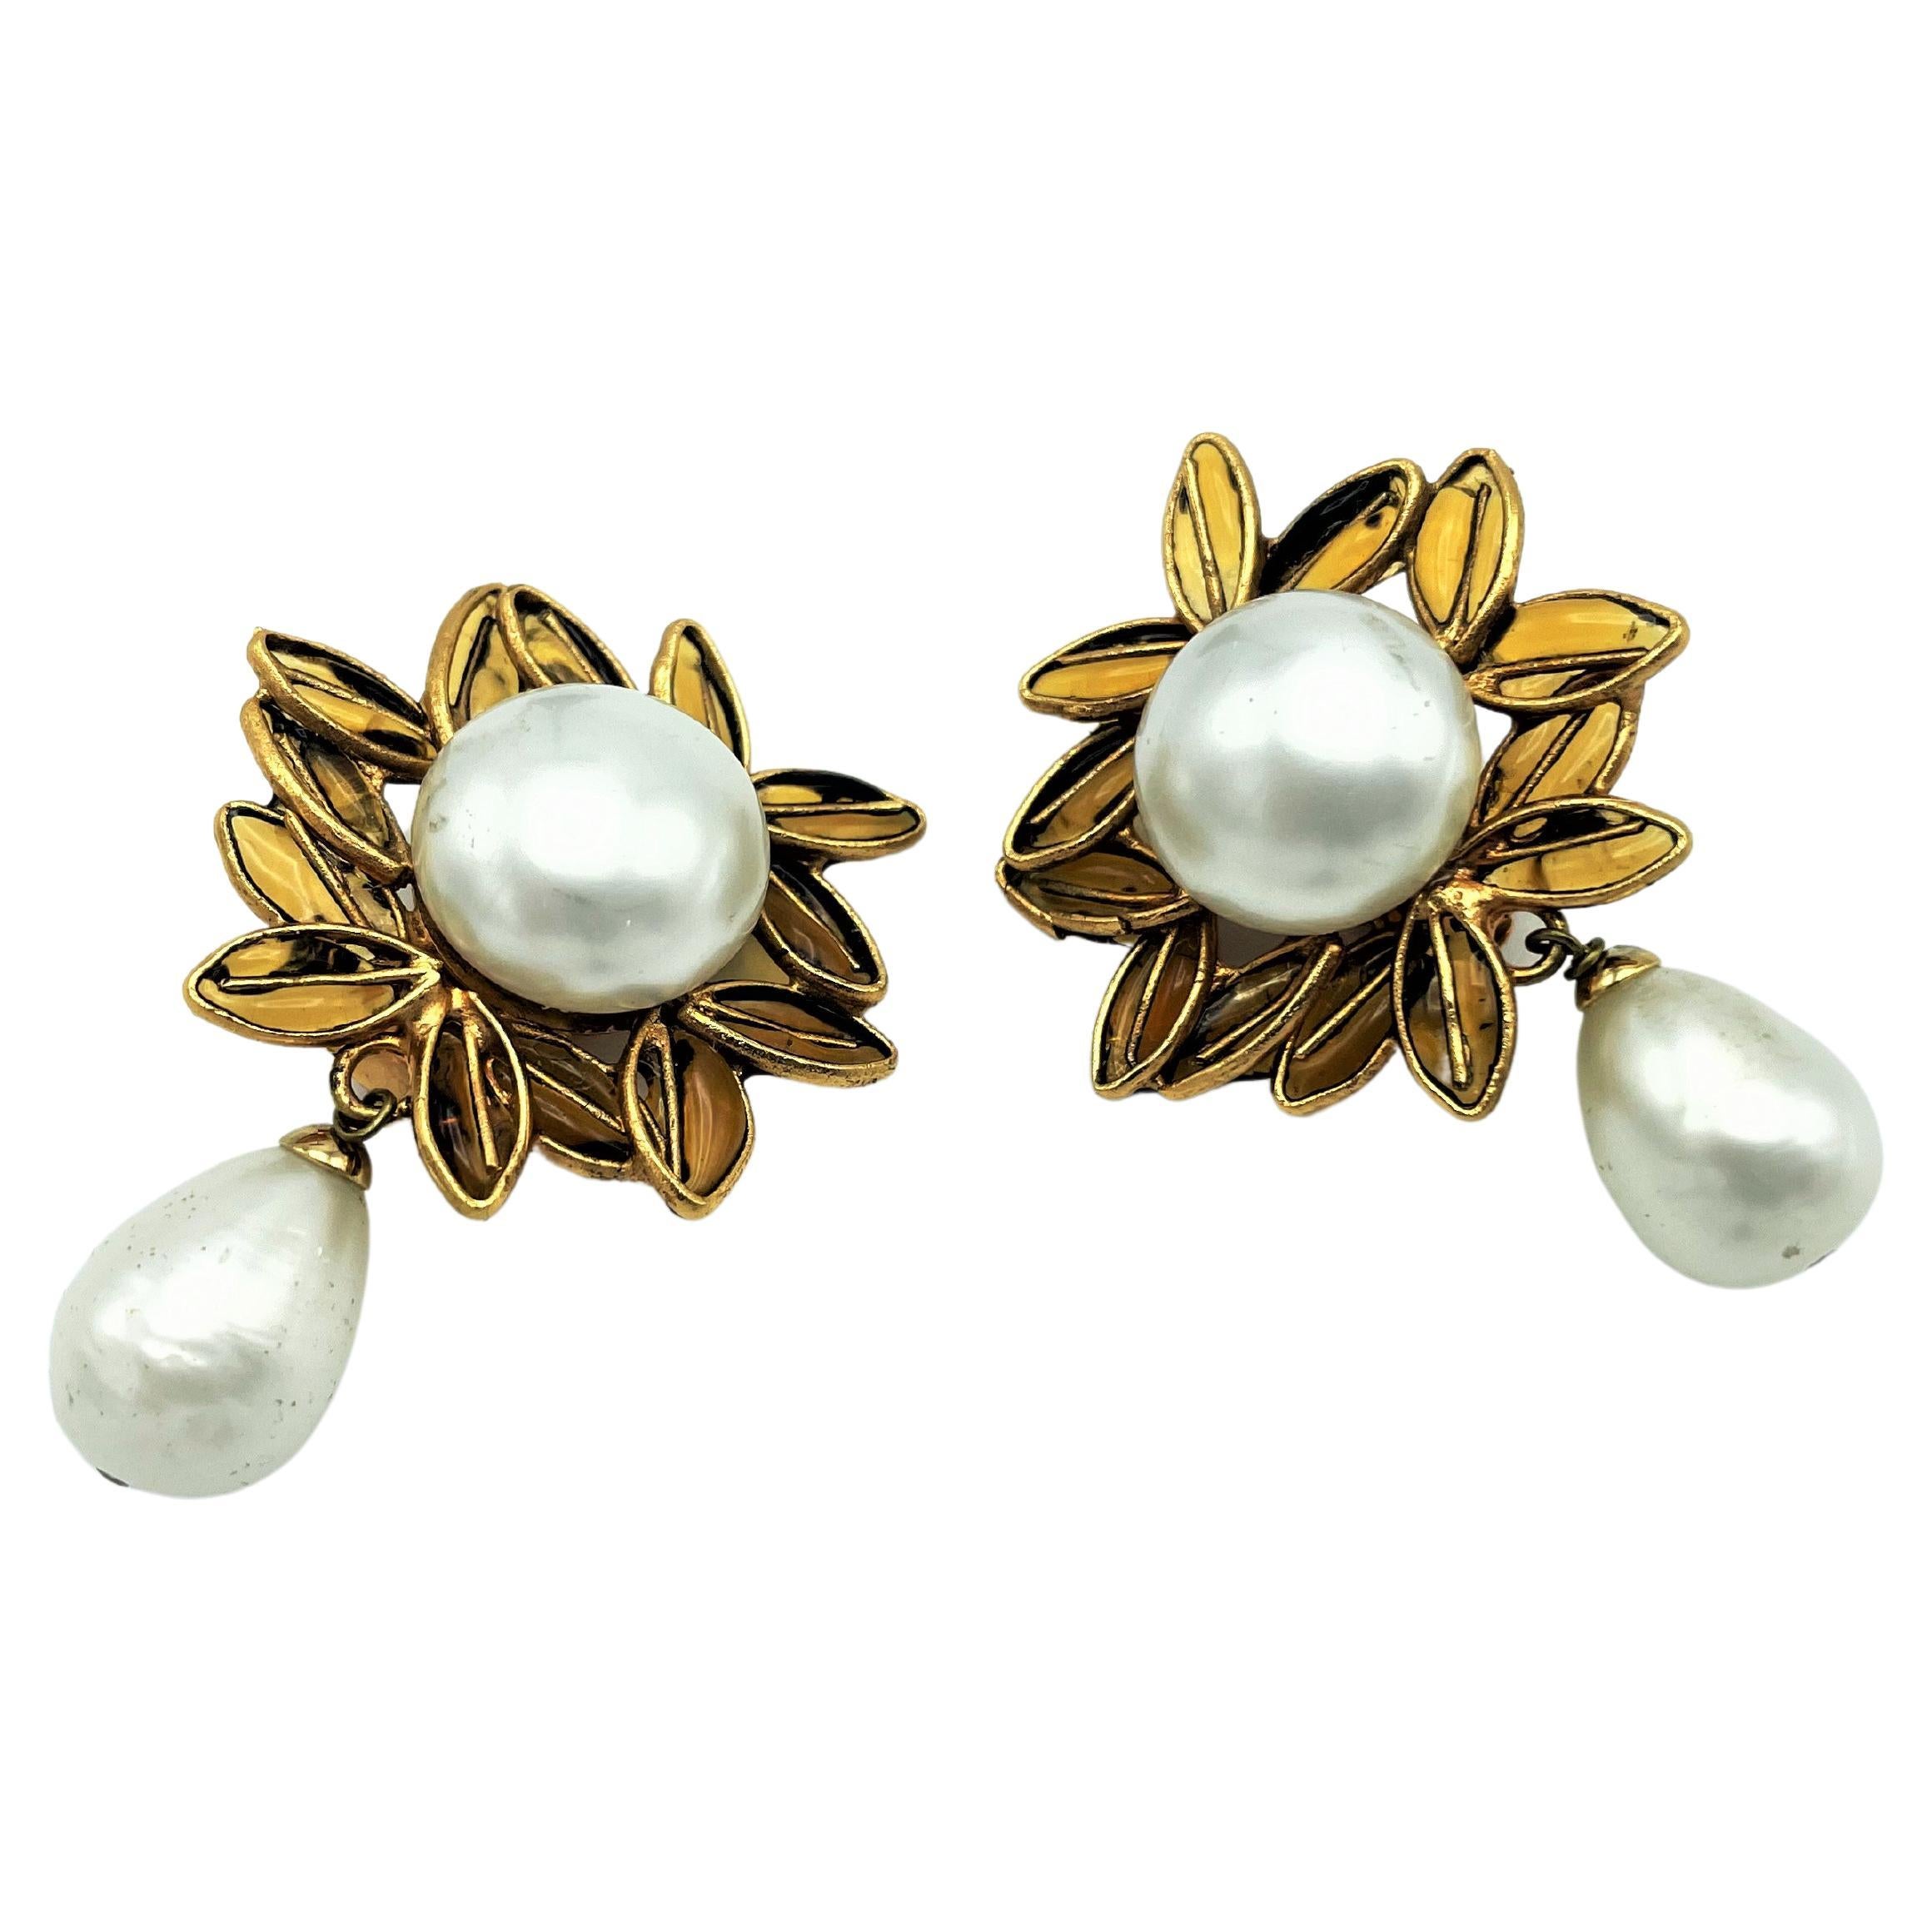 ISABEL CANOVAS Paris clip-on earring, Gripoix and fraux pearls, 1980 